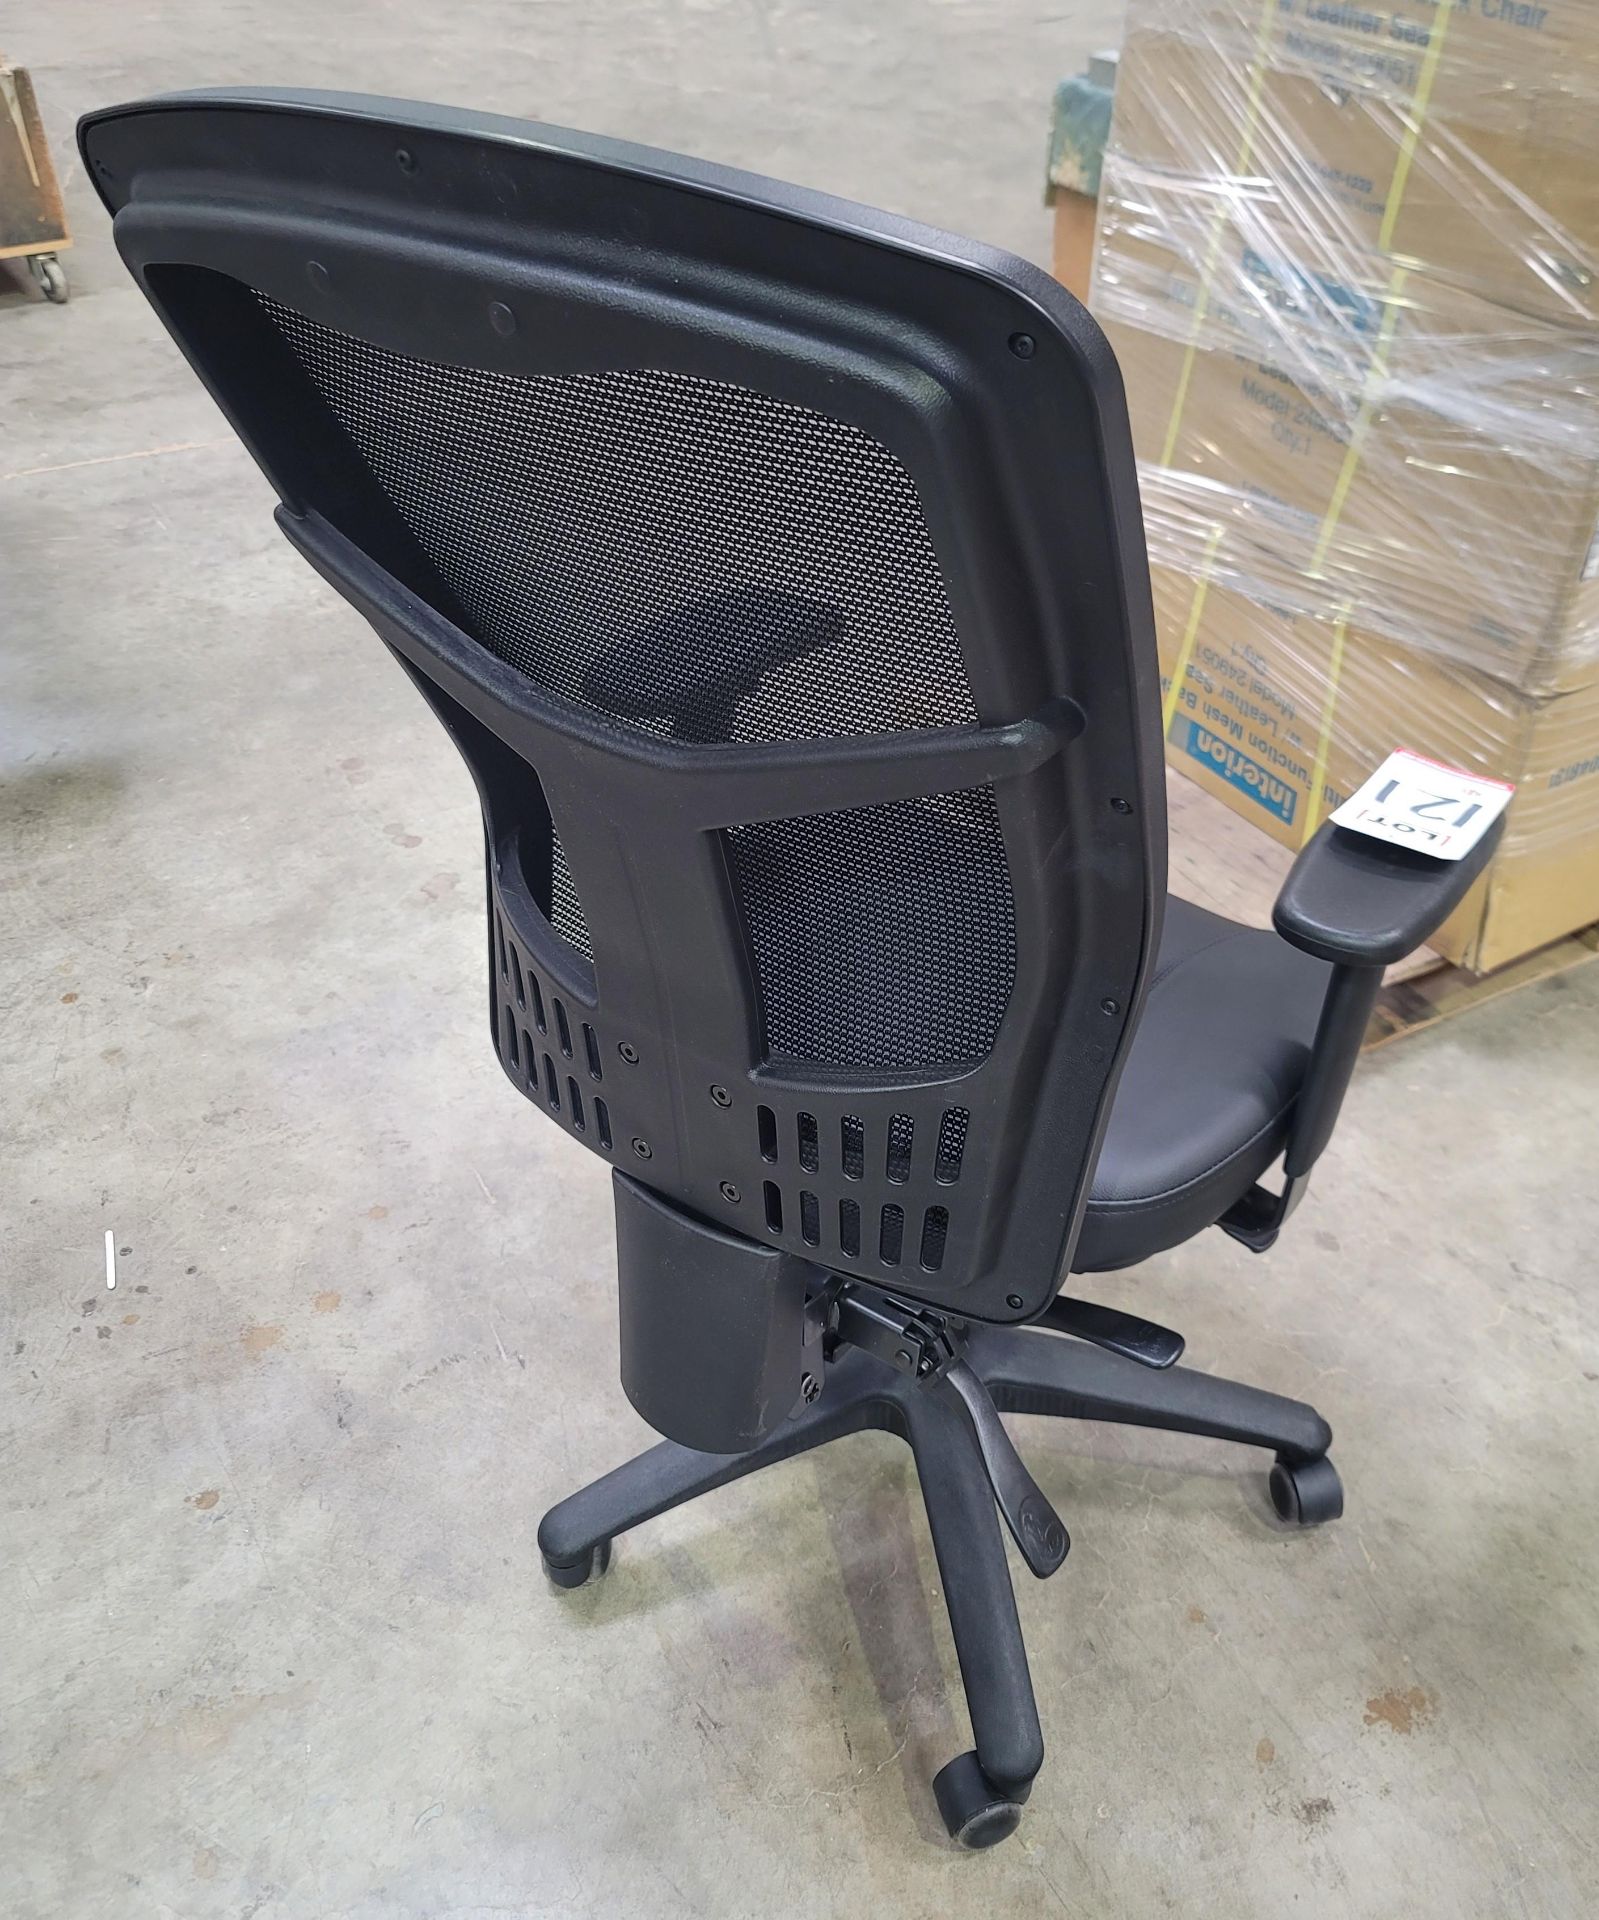 INTERION MULTI-FUNCTION MESH & LEATHER HIGHBACK TASK CHAIR, ASSEMBLED, MODEL 249051 - Image 2 of 2